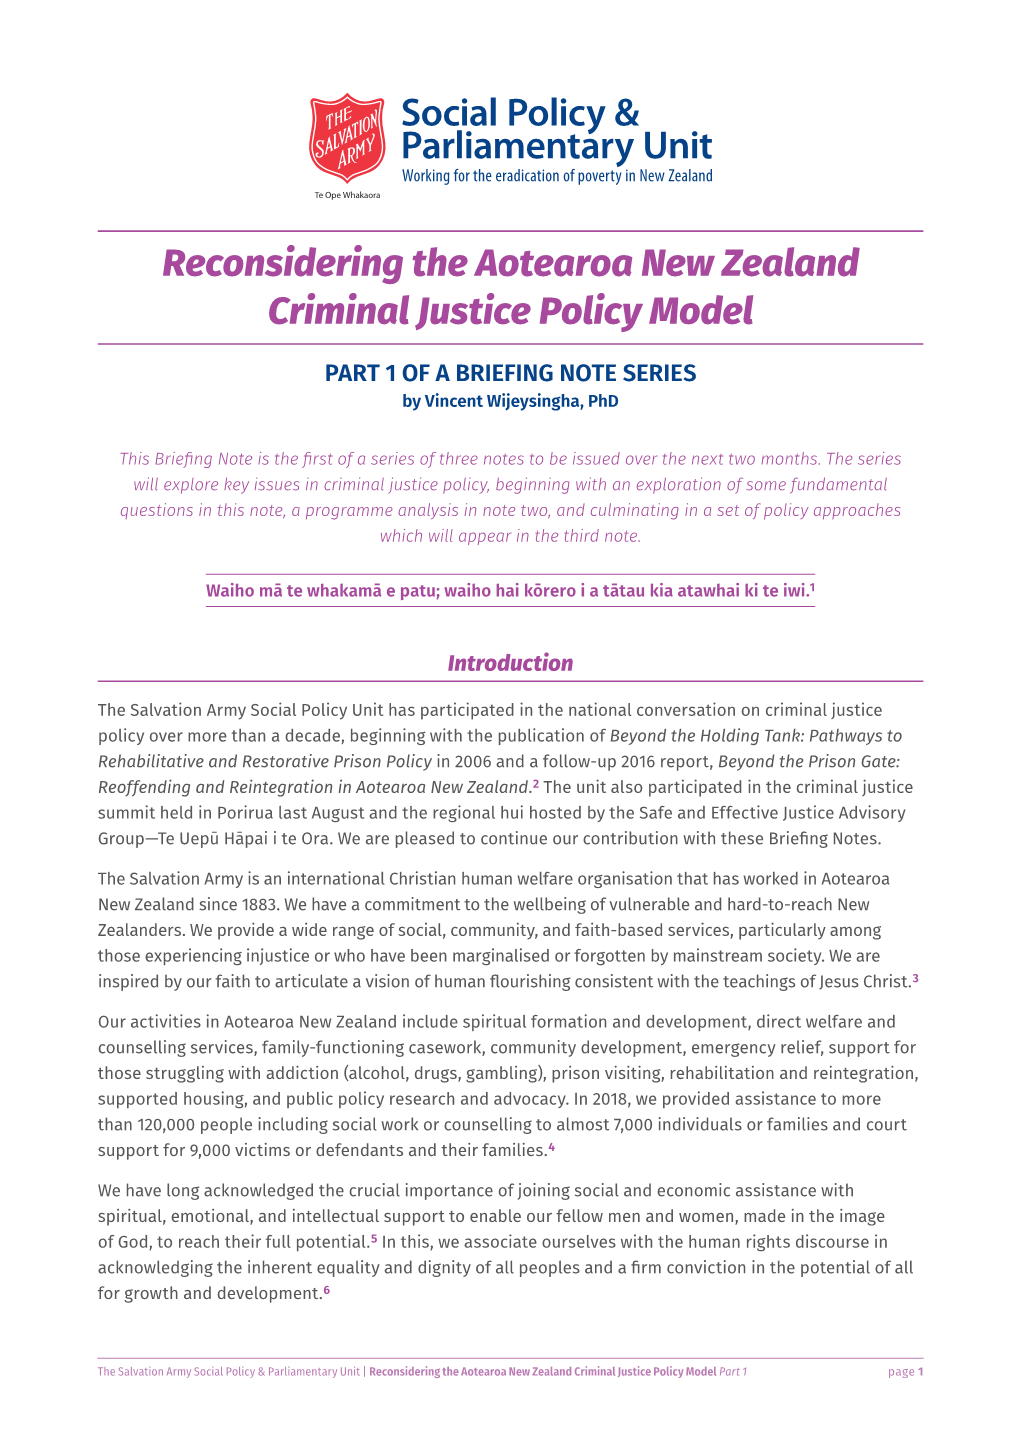 Reconsidering the Aotearoa New Zealand Criminal Justice Policy Model